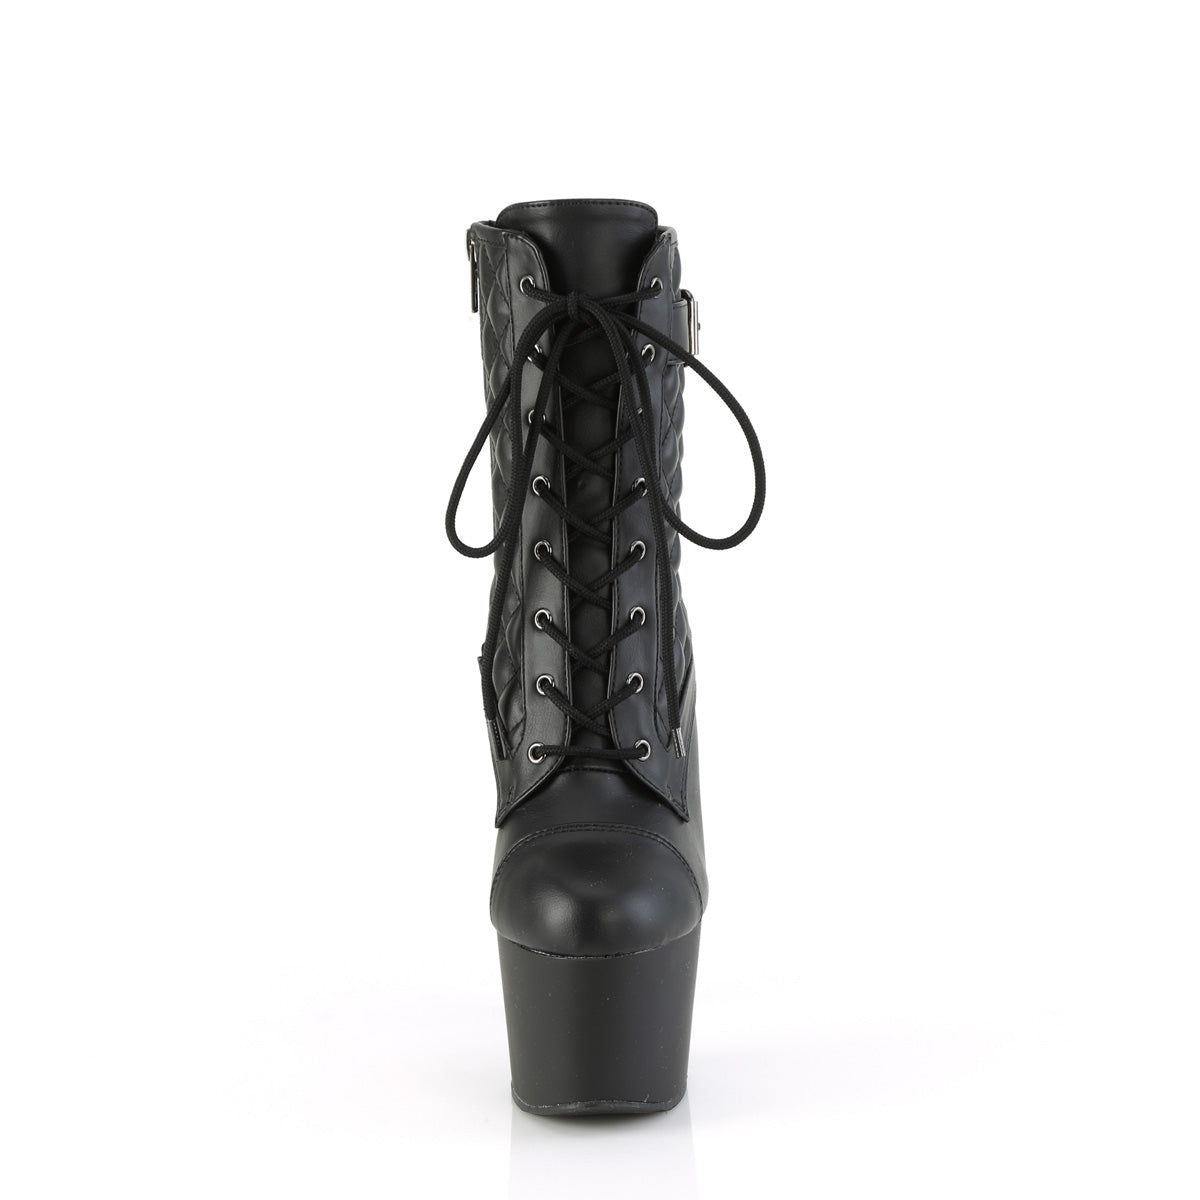 ADORE-1033 Buckled Lace-Up Ankle Boot